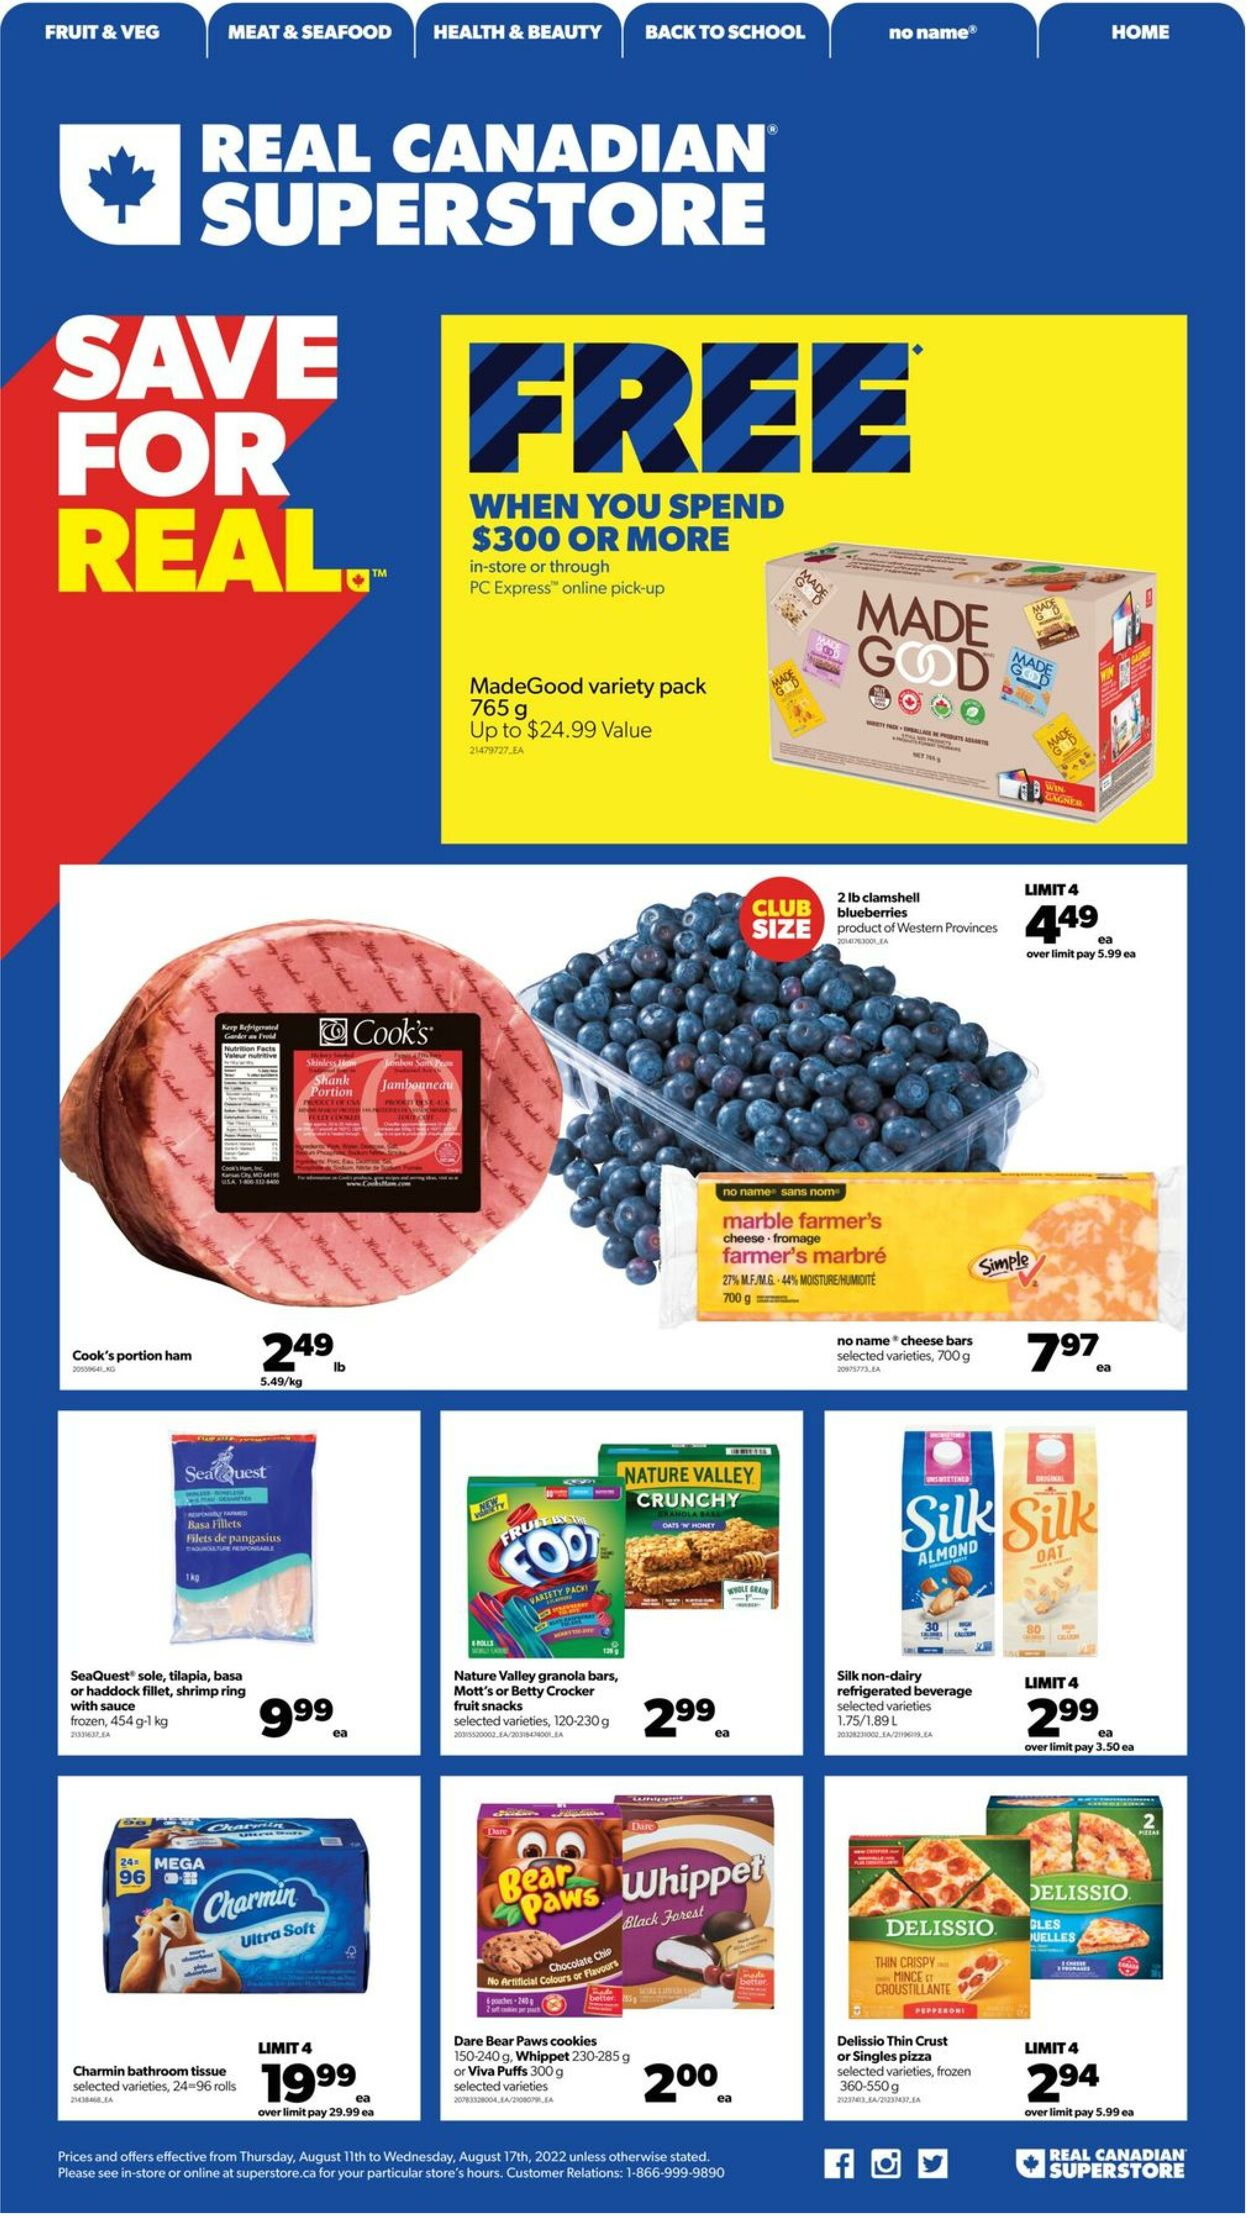 Real Canadian Superstore Promotional flyers